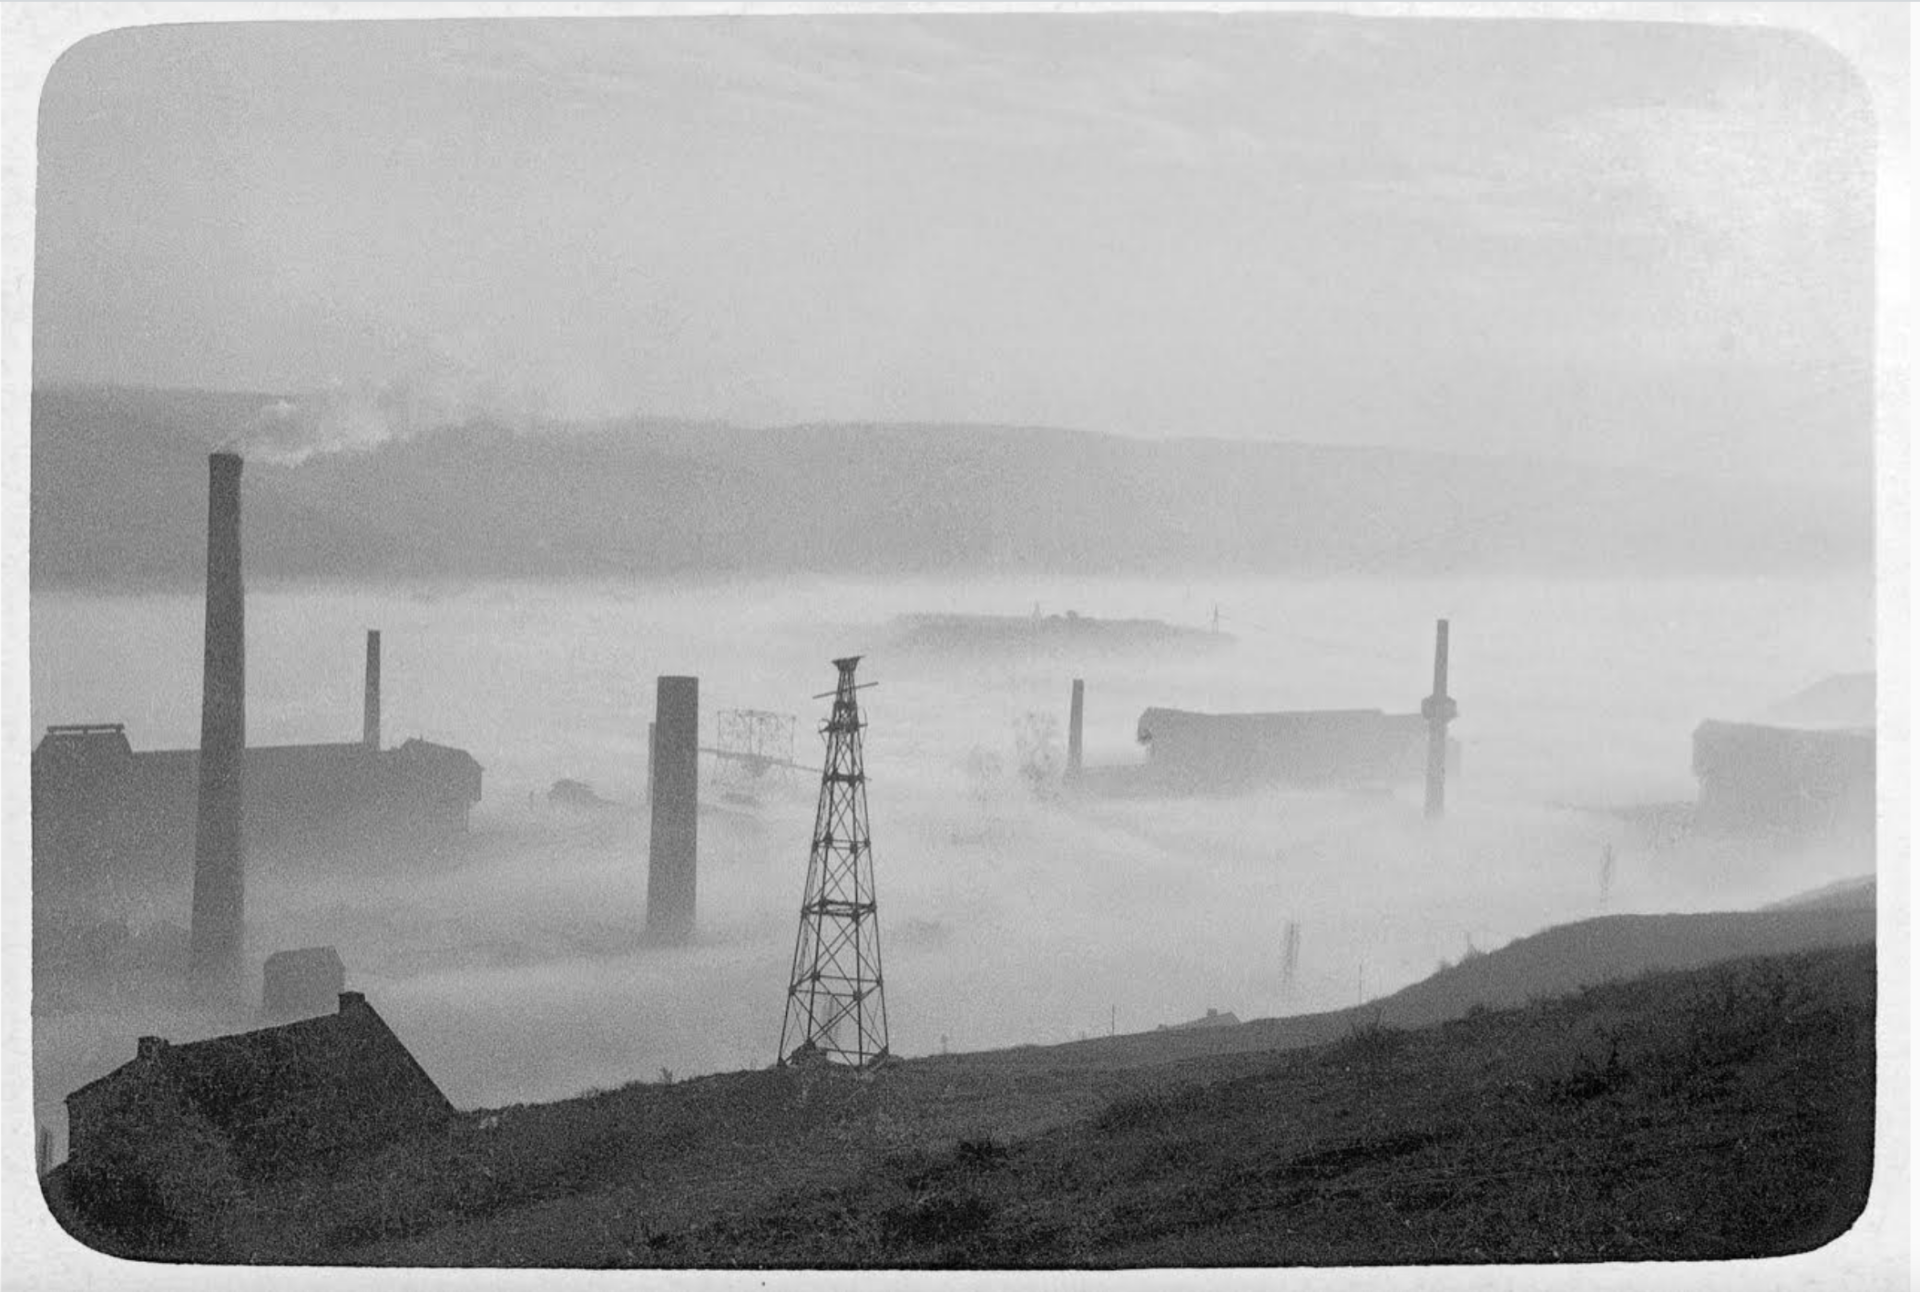 Today in History: The mysterious Meuse Valley fog disaster